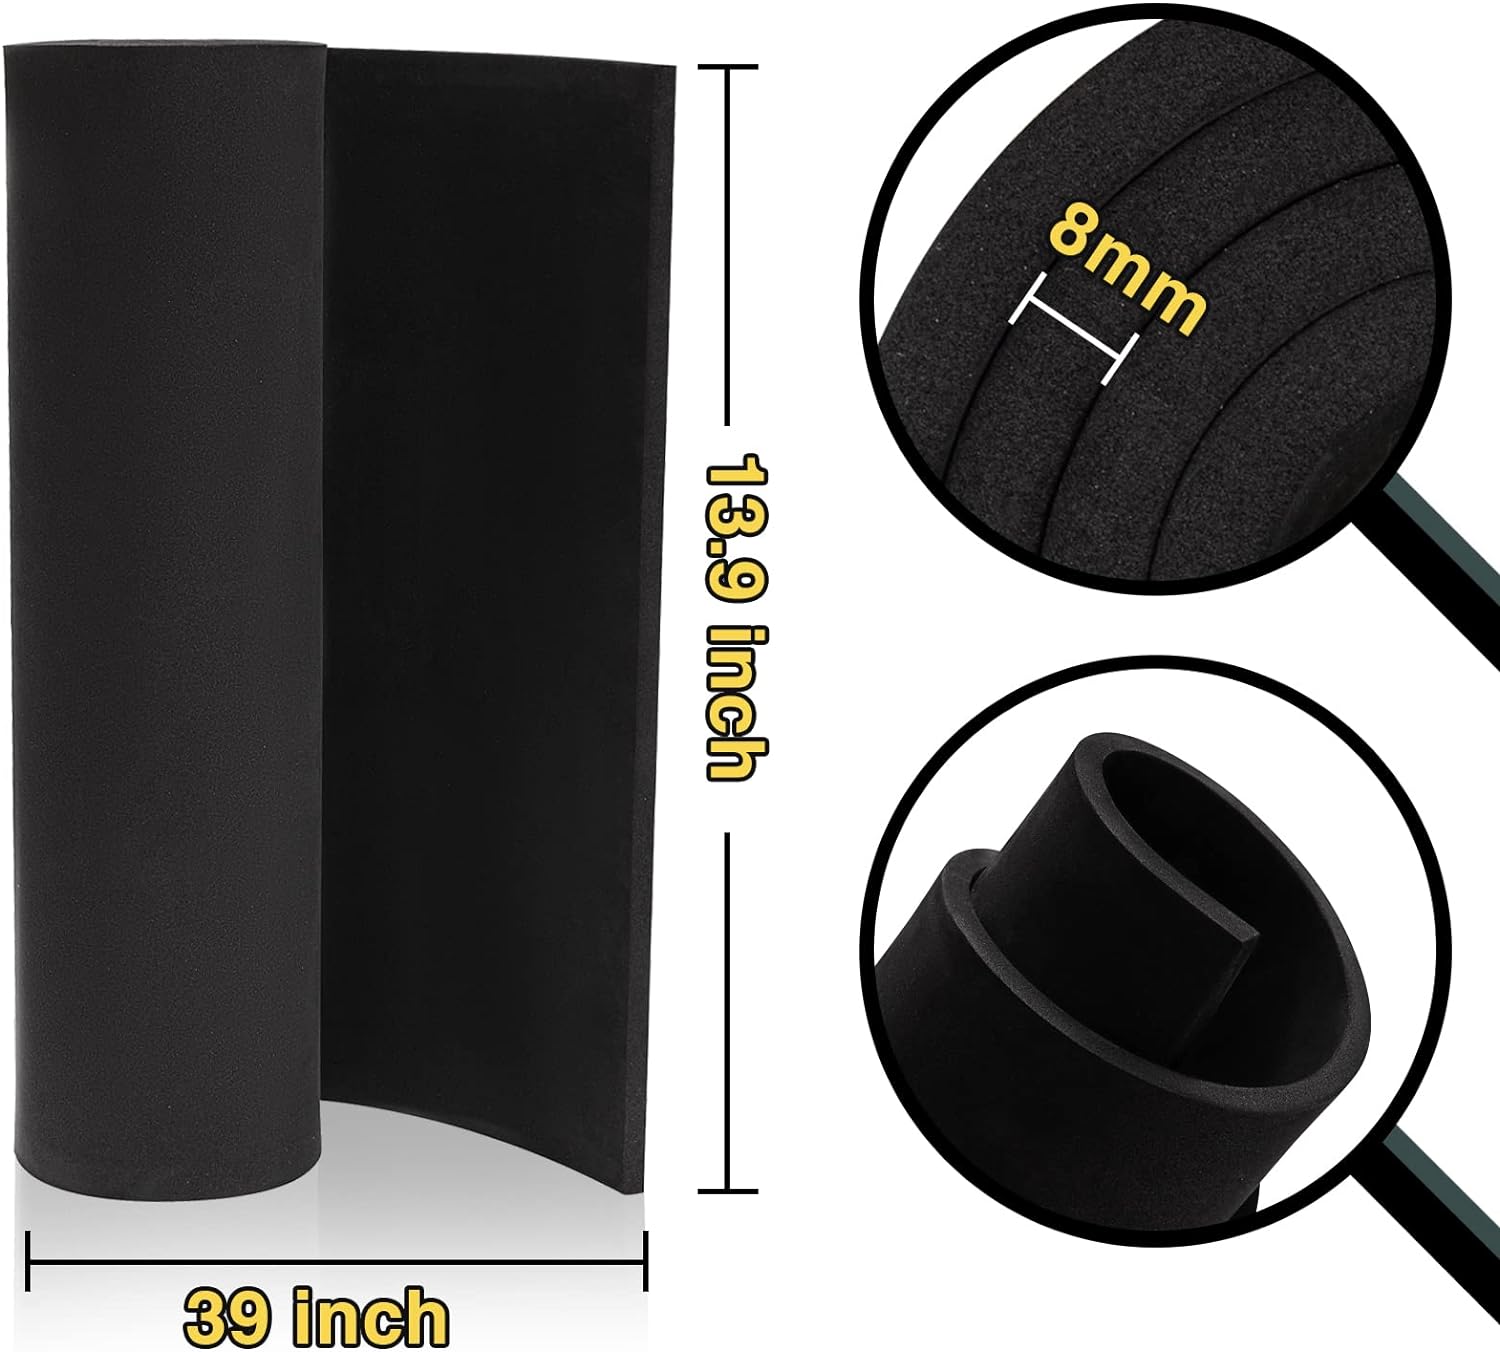 Black Foam Sheets Roll Premium Cosplay Eva Foam Sheet 8mm Thick 13.9"x39" High Density 86kg/m3 For Cosplay Costume Crafts DIY Projects By PAIDU